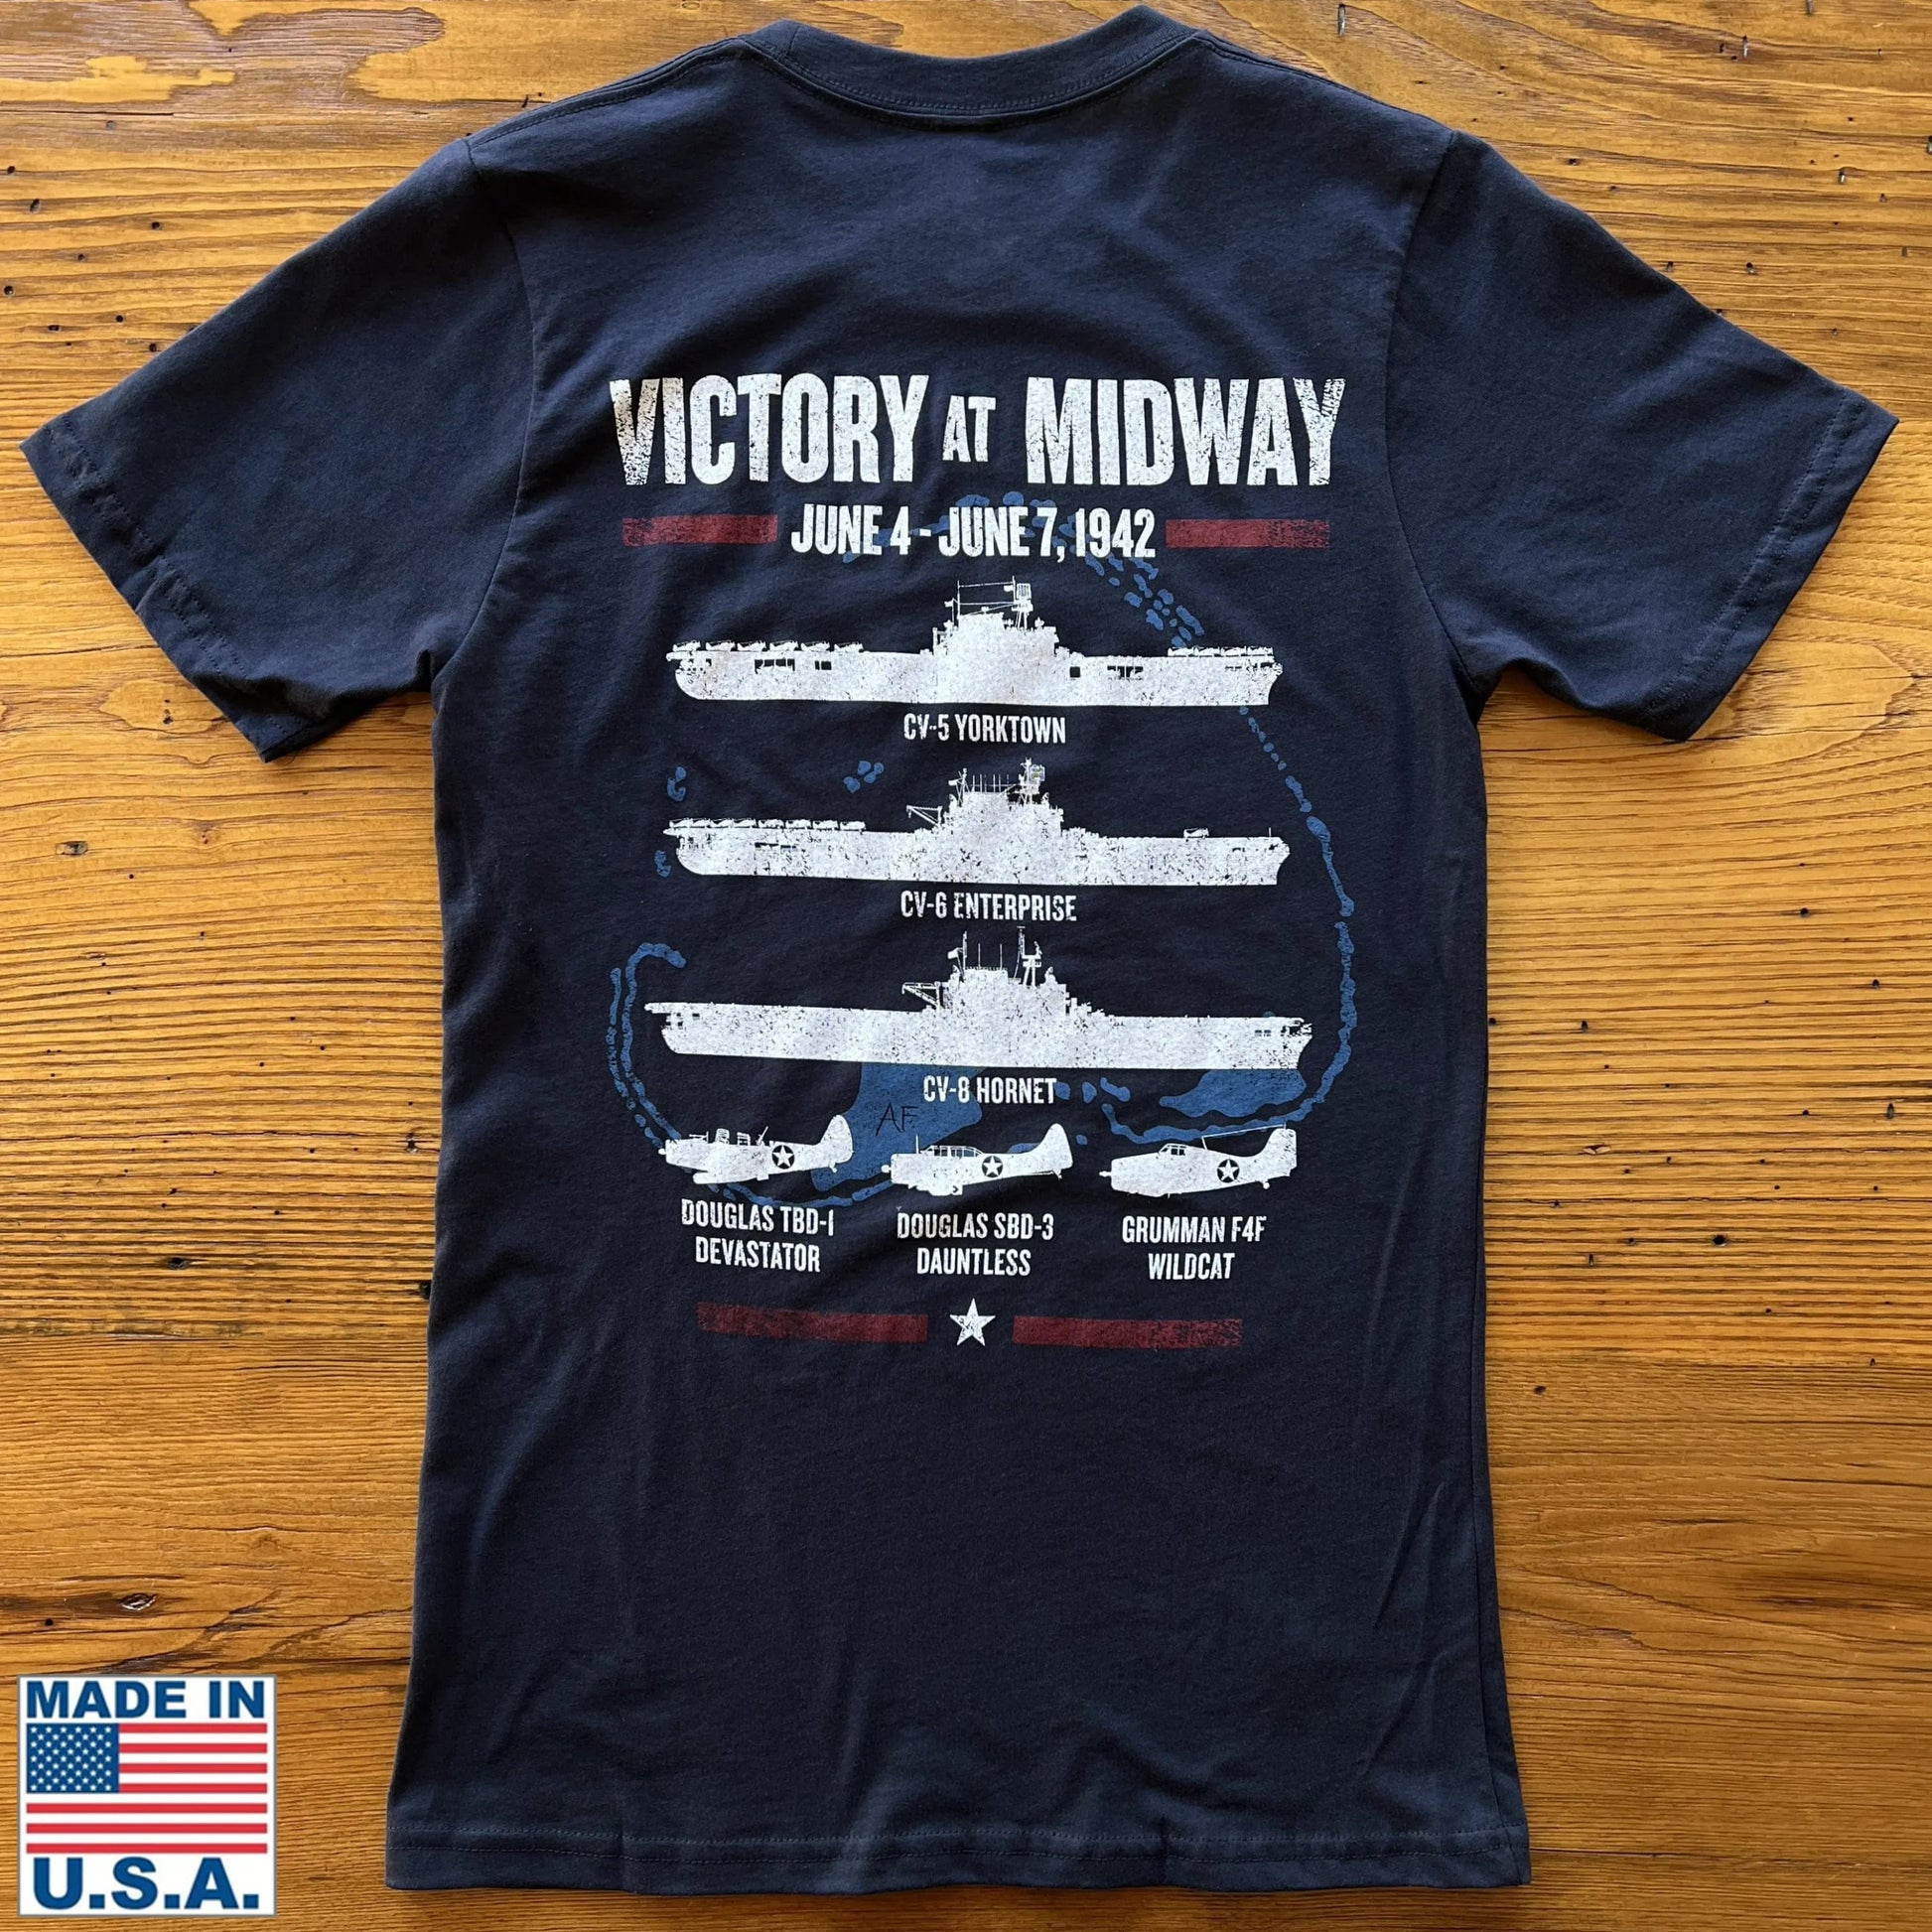 Back of "Victory at Midway" Shirt from The History List store